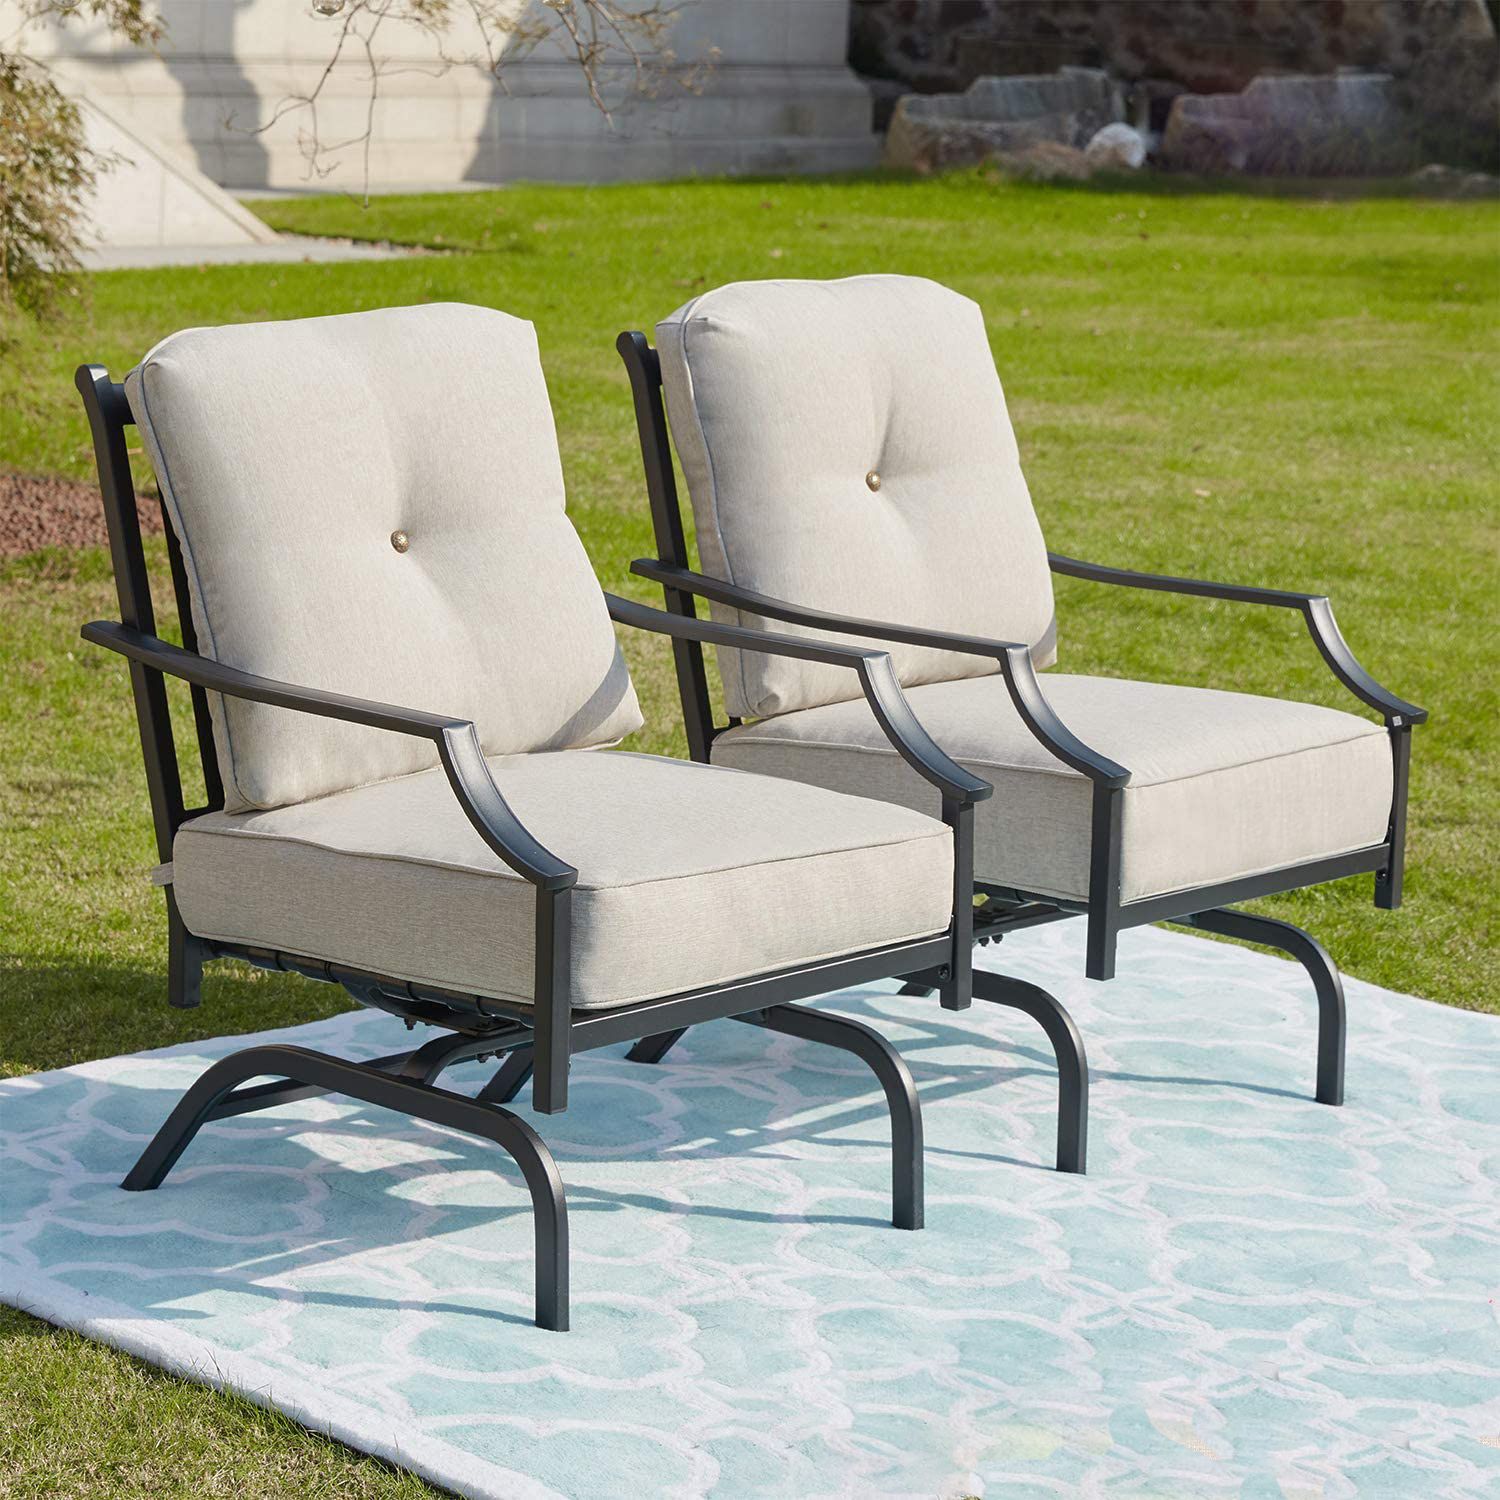 Rocking Patio Chairs Outdoor Metal Furniture Motion Spring With Regard To Rocking Sofa Chairs (View 8 of 15)